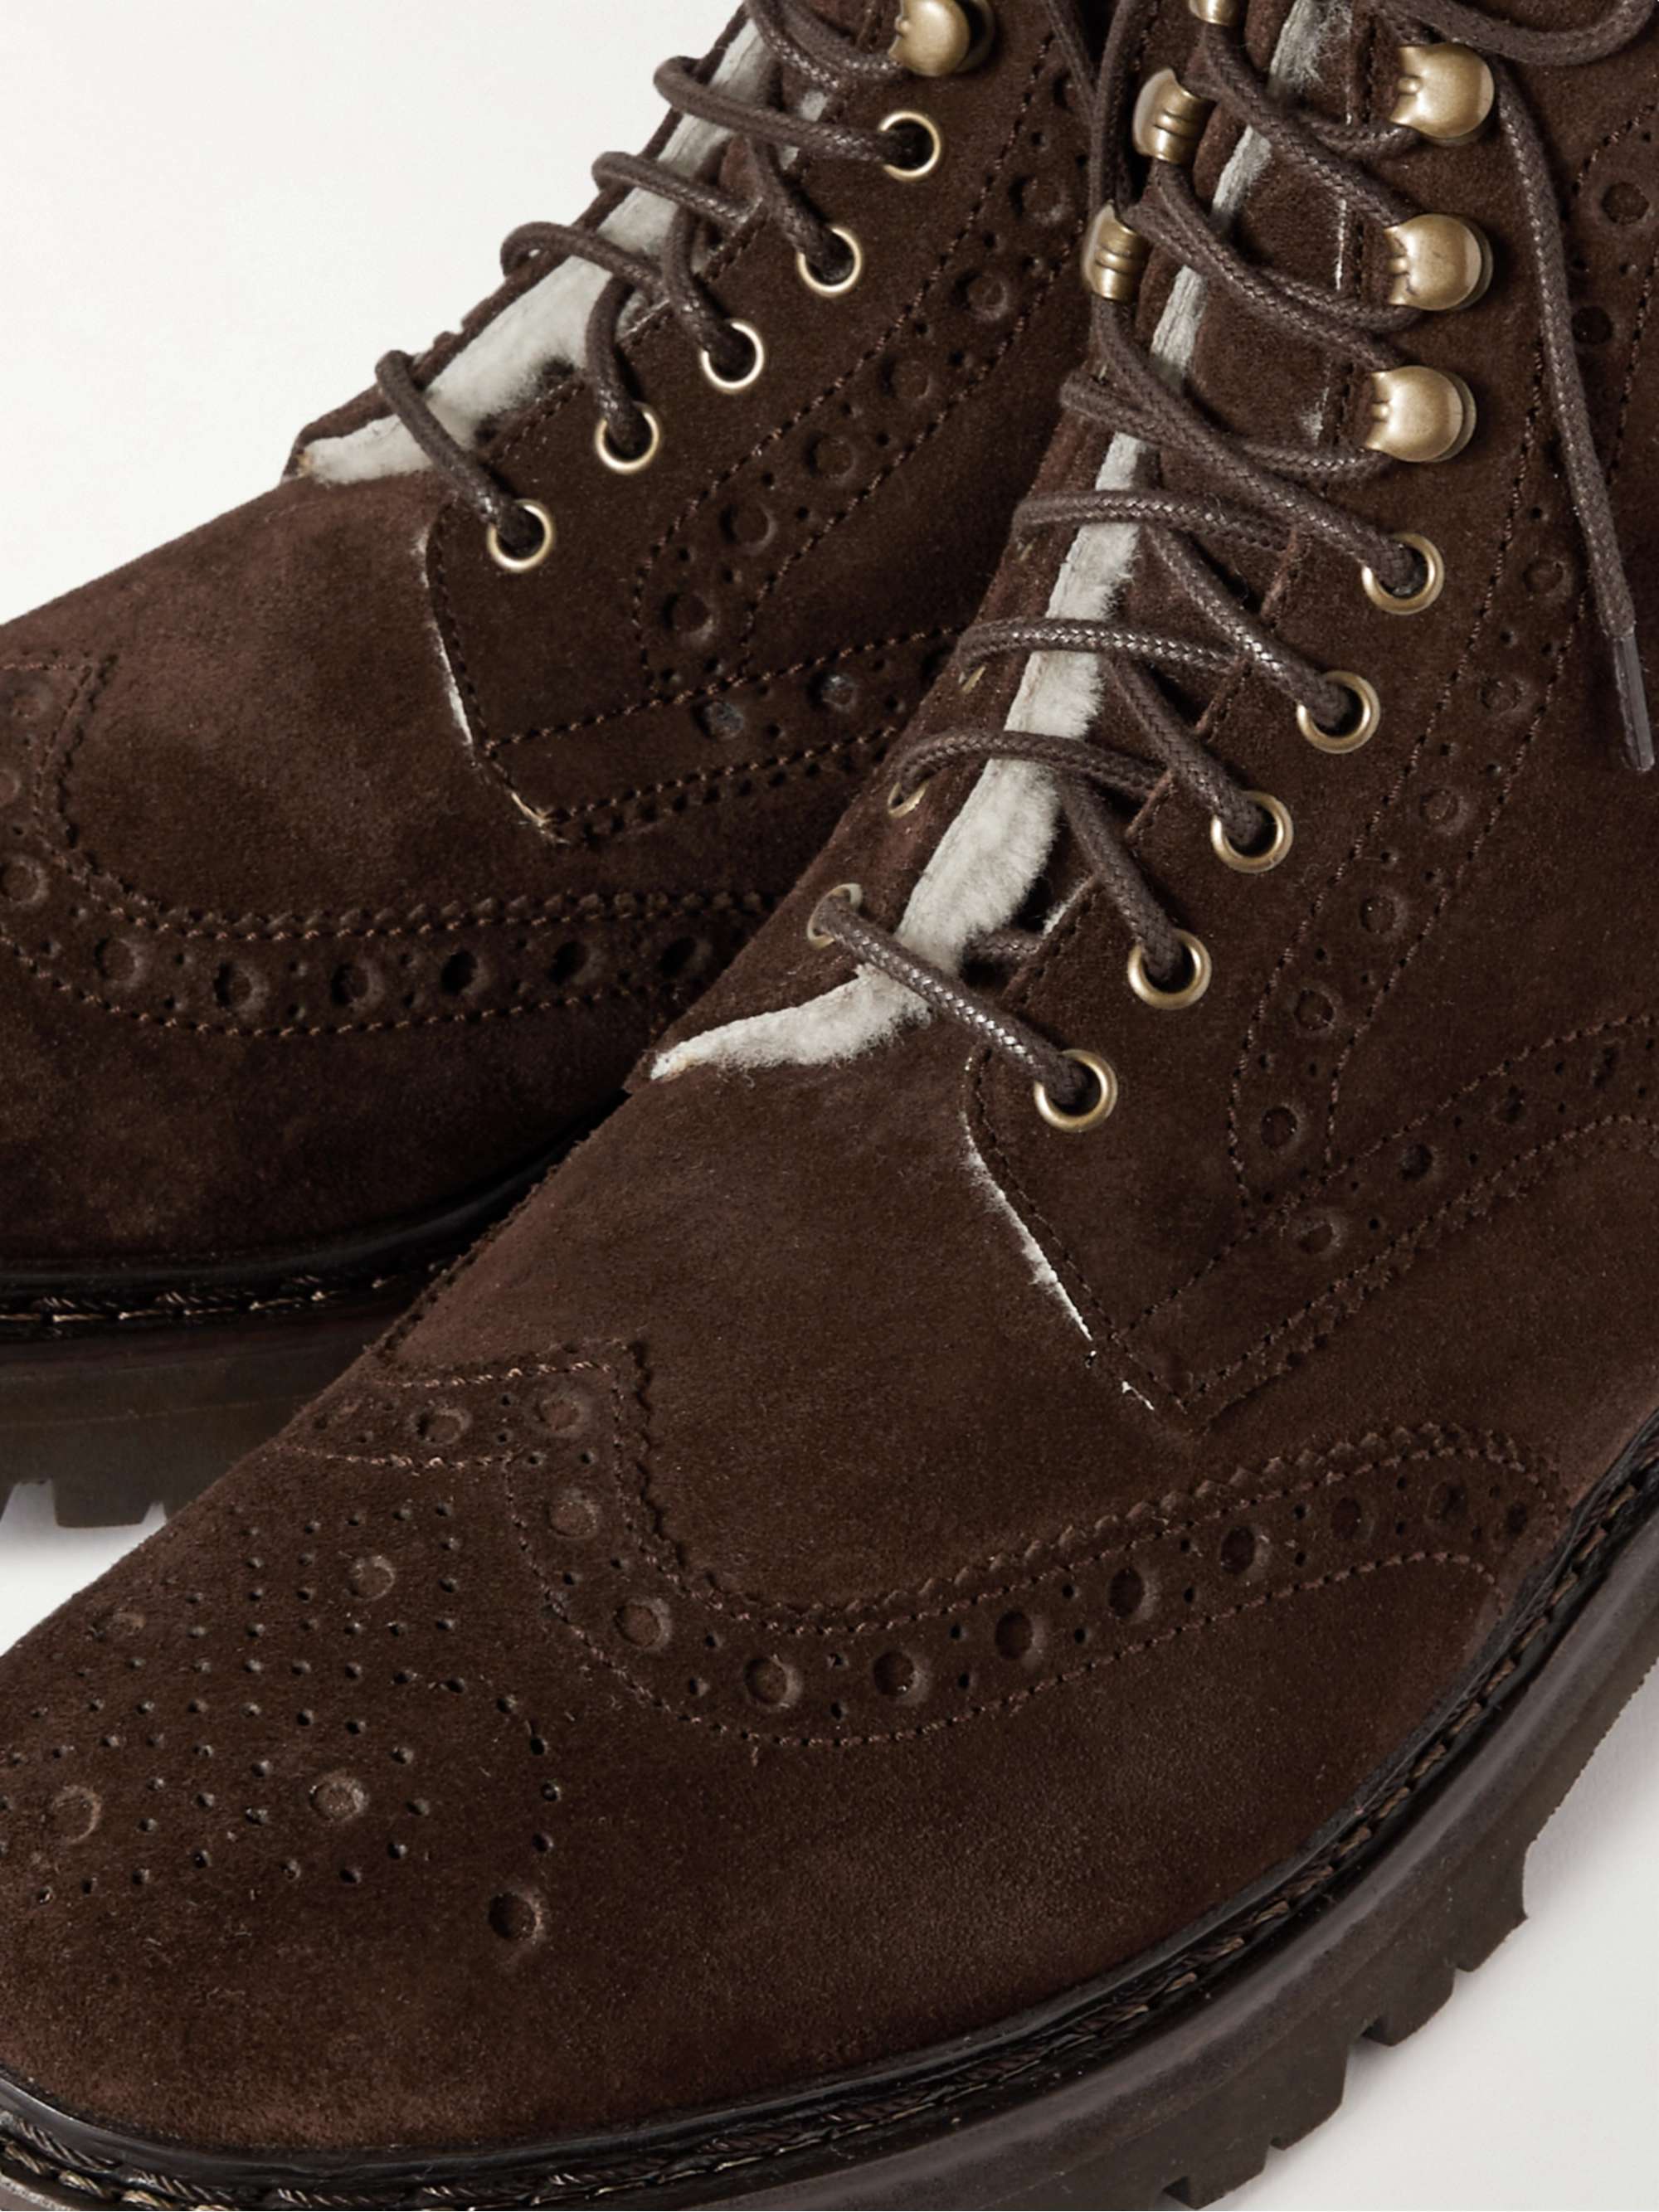 GRENSON Fred Shearling-Lined Suede Brogue Boots